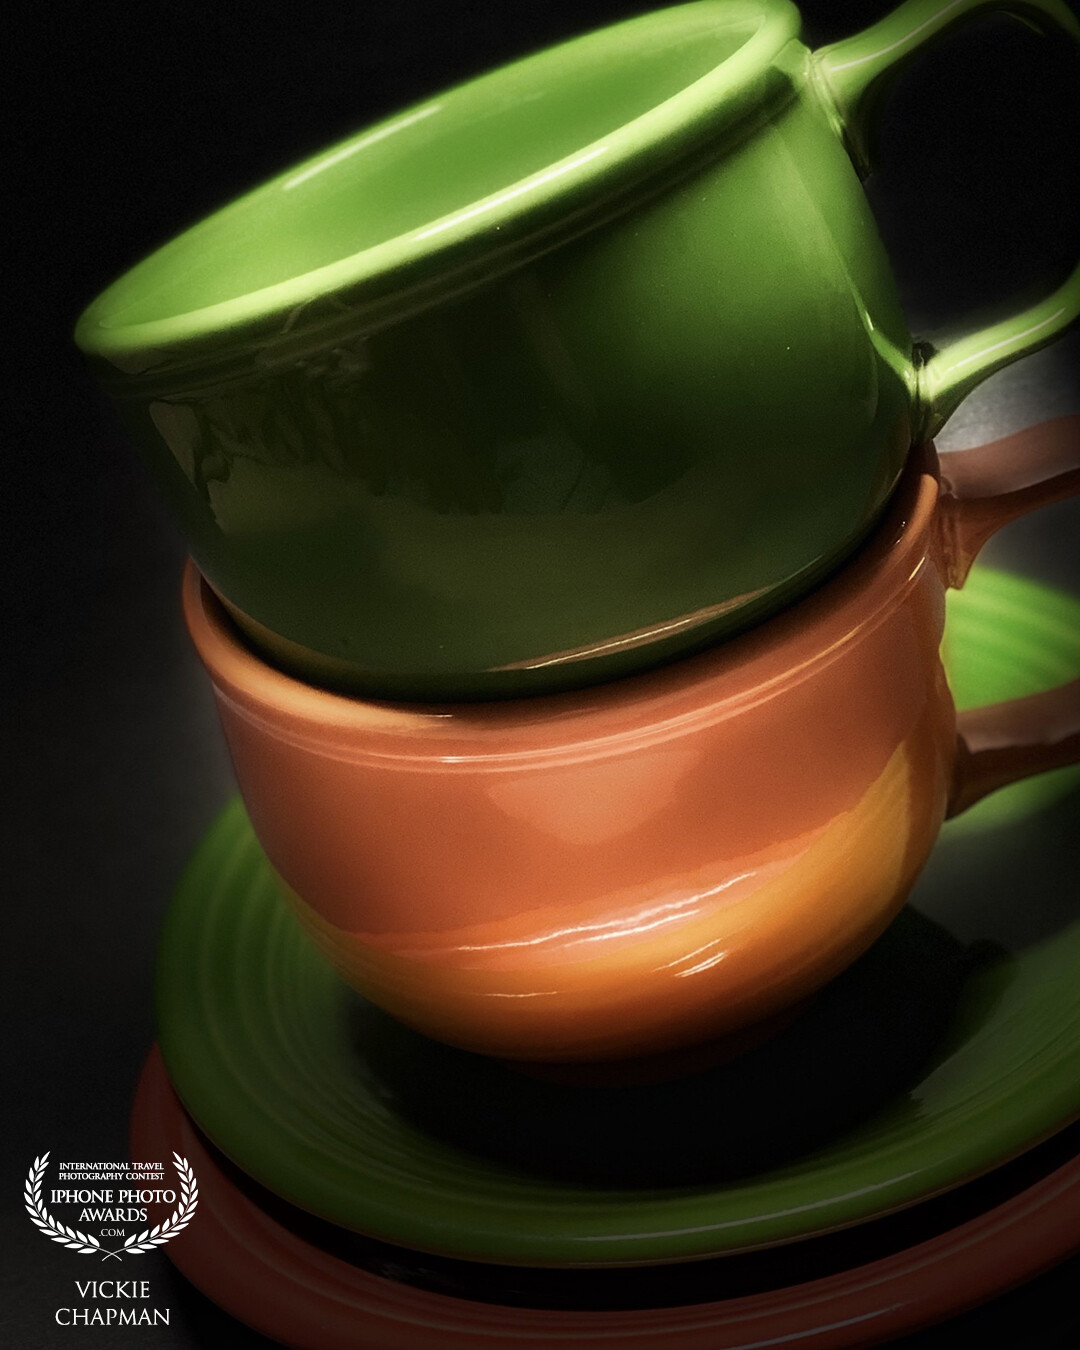 Simple colorful cups and saucers were used with some dramatic lighting to achieve this photo.